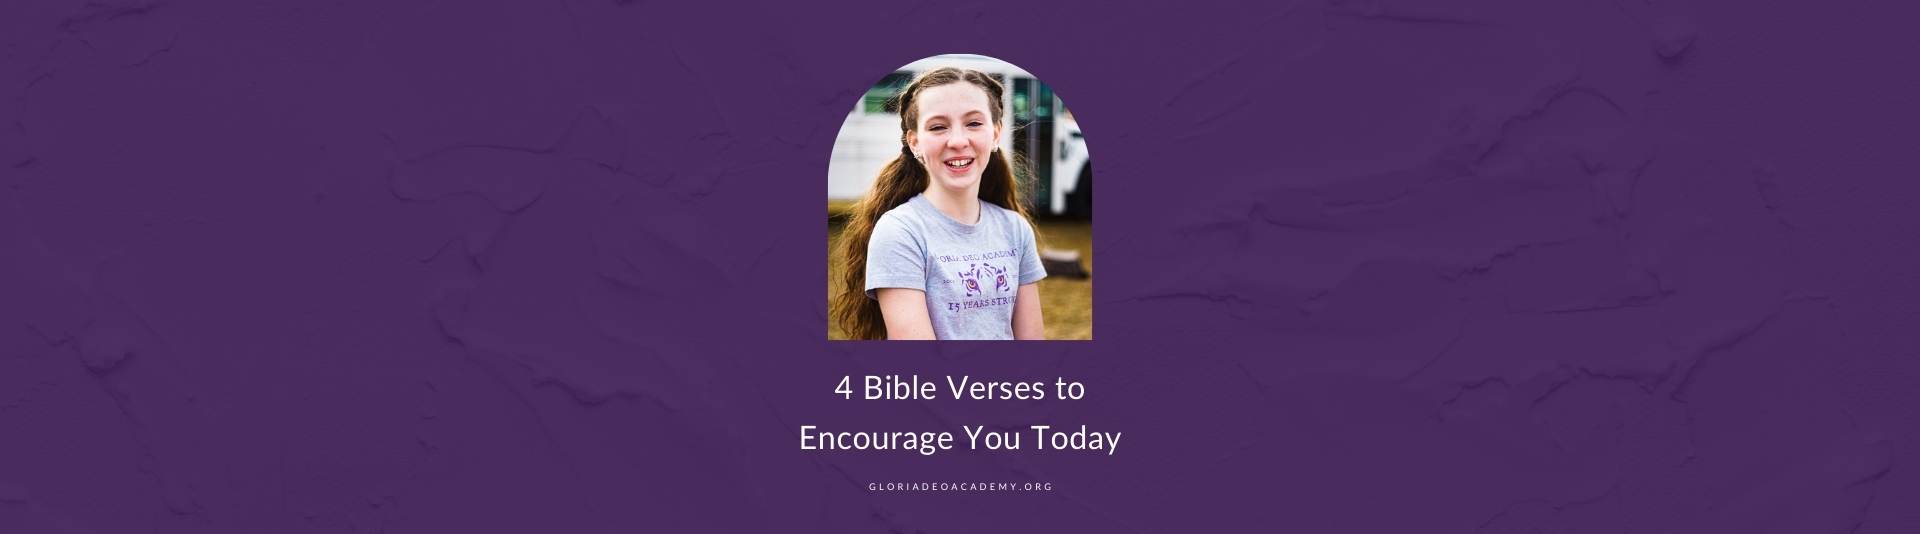 GDA 4 Bible Verses to Encourage You Today